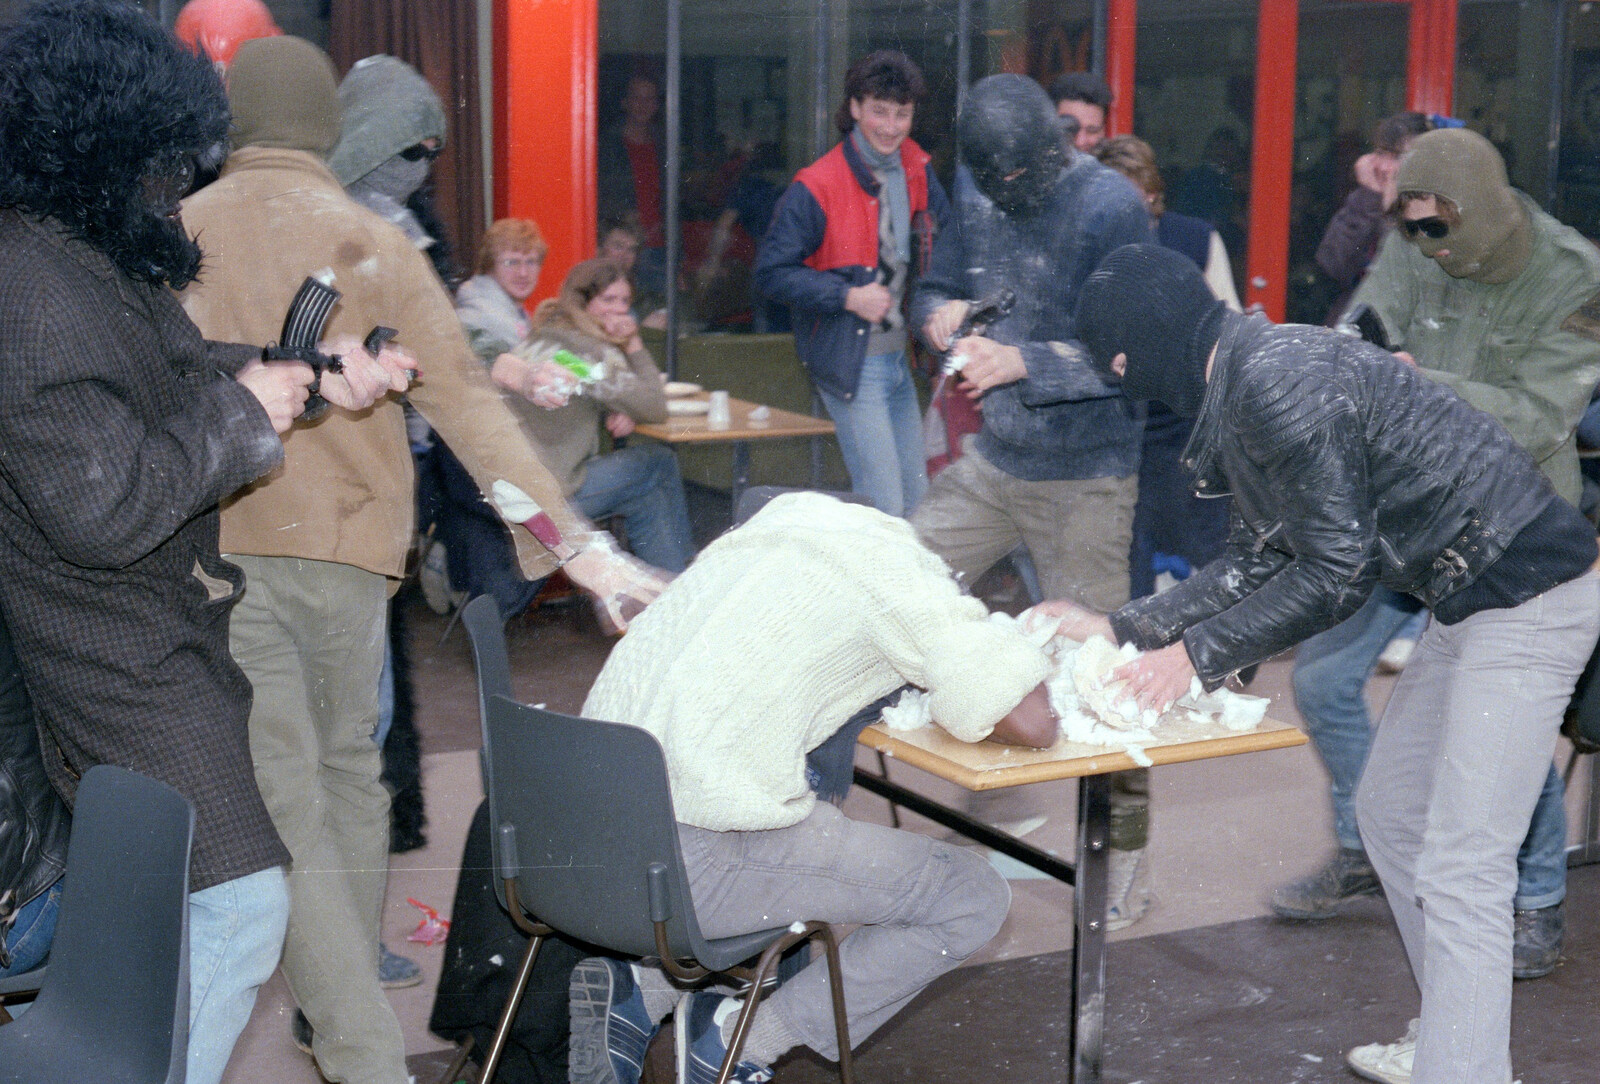 A lunchtime victim from Uni: The Pirate RAG Hit Squad, Plymouth Polytechnic, Devon - 8th February 1987